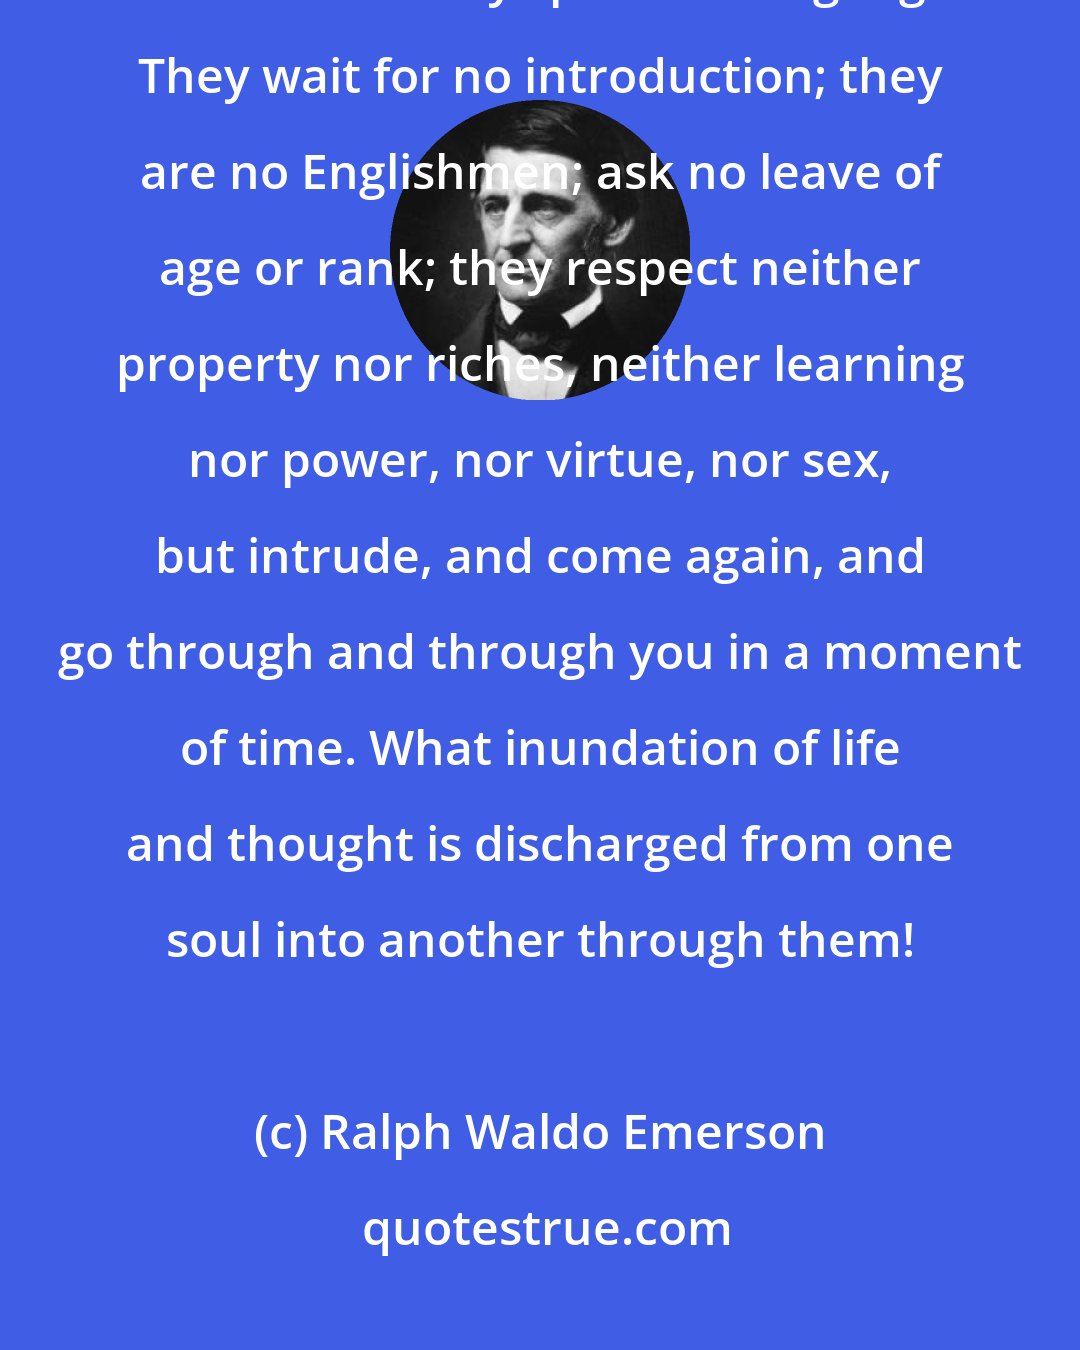 Ralph Waldo Emerson: Eyes are bold as lions,--roving, running, leaping, here and there, far and near. They speak all languages. They wait for no introduction; they are no Englishmen; ask no leave of age or rank; they respect neither property nor riches, neither learning nor power, nor virtue, nor sex, but intrude, and come again, and go through and through you in a moment of time. What inundation of life and thought is discharged from one soul into another through them!